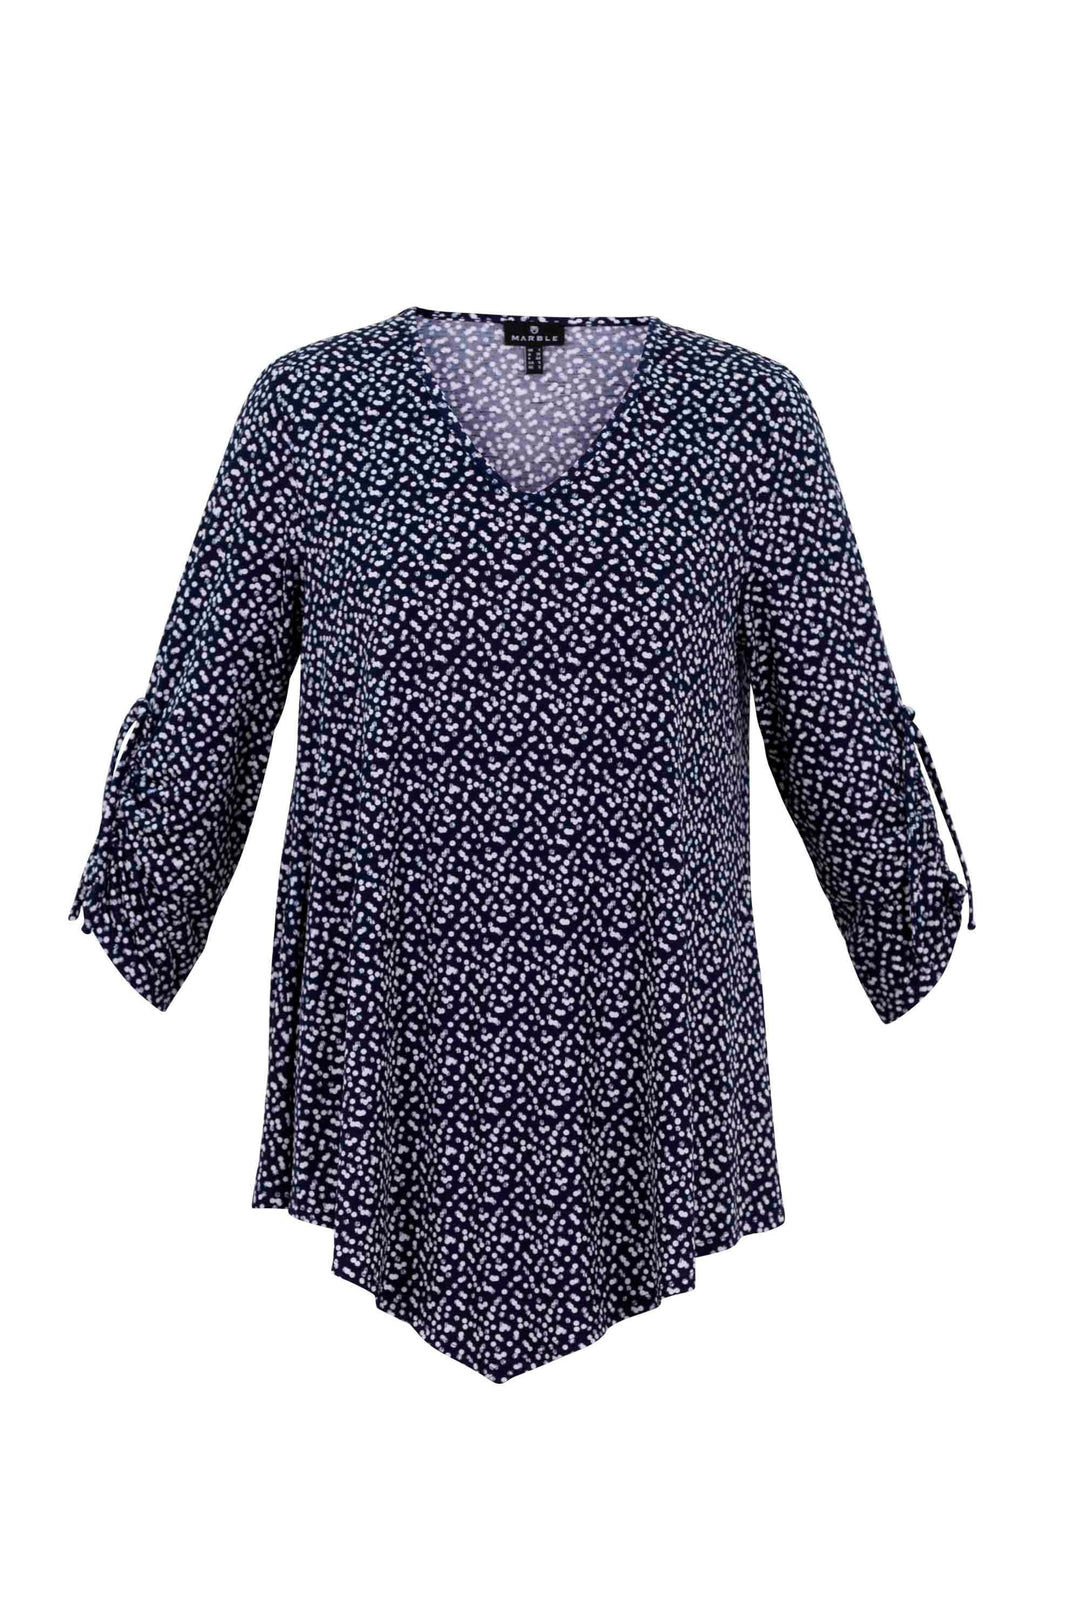 Marble Tunic Style 6956-103 - Navy, New, SS23, Tunic ginasmartboutique